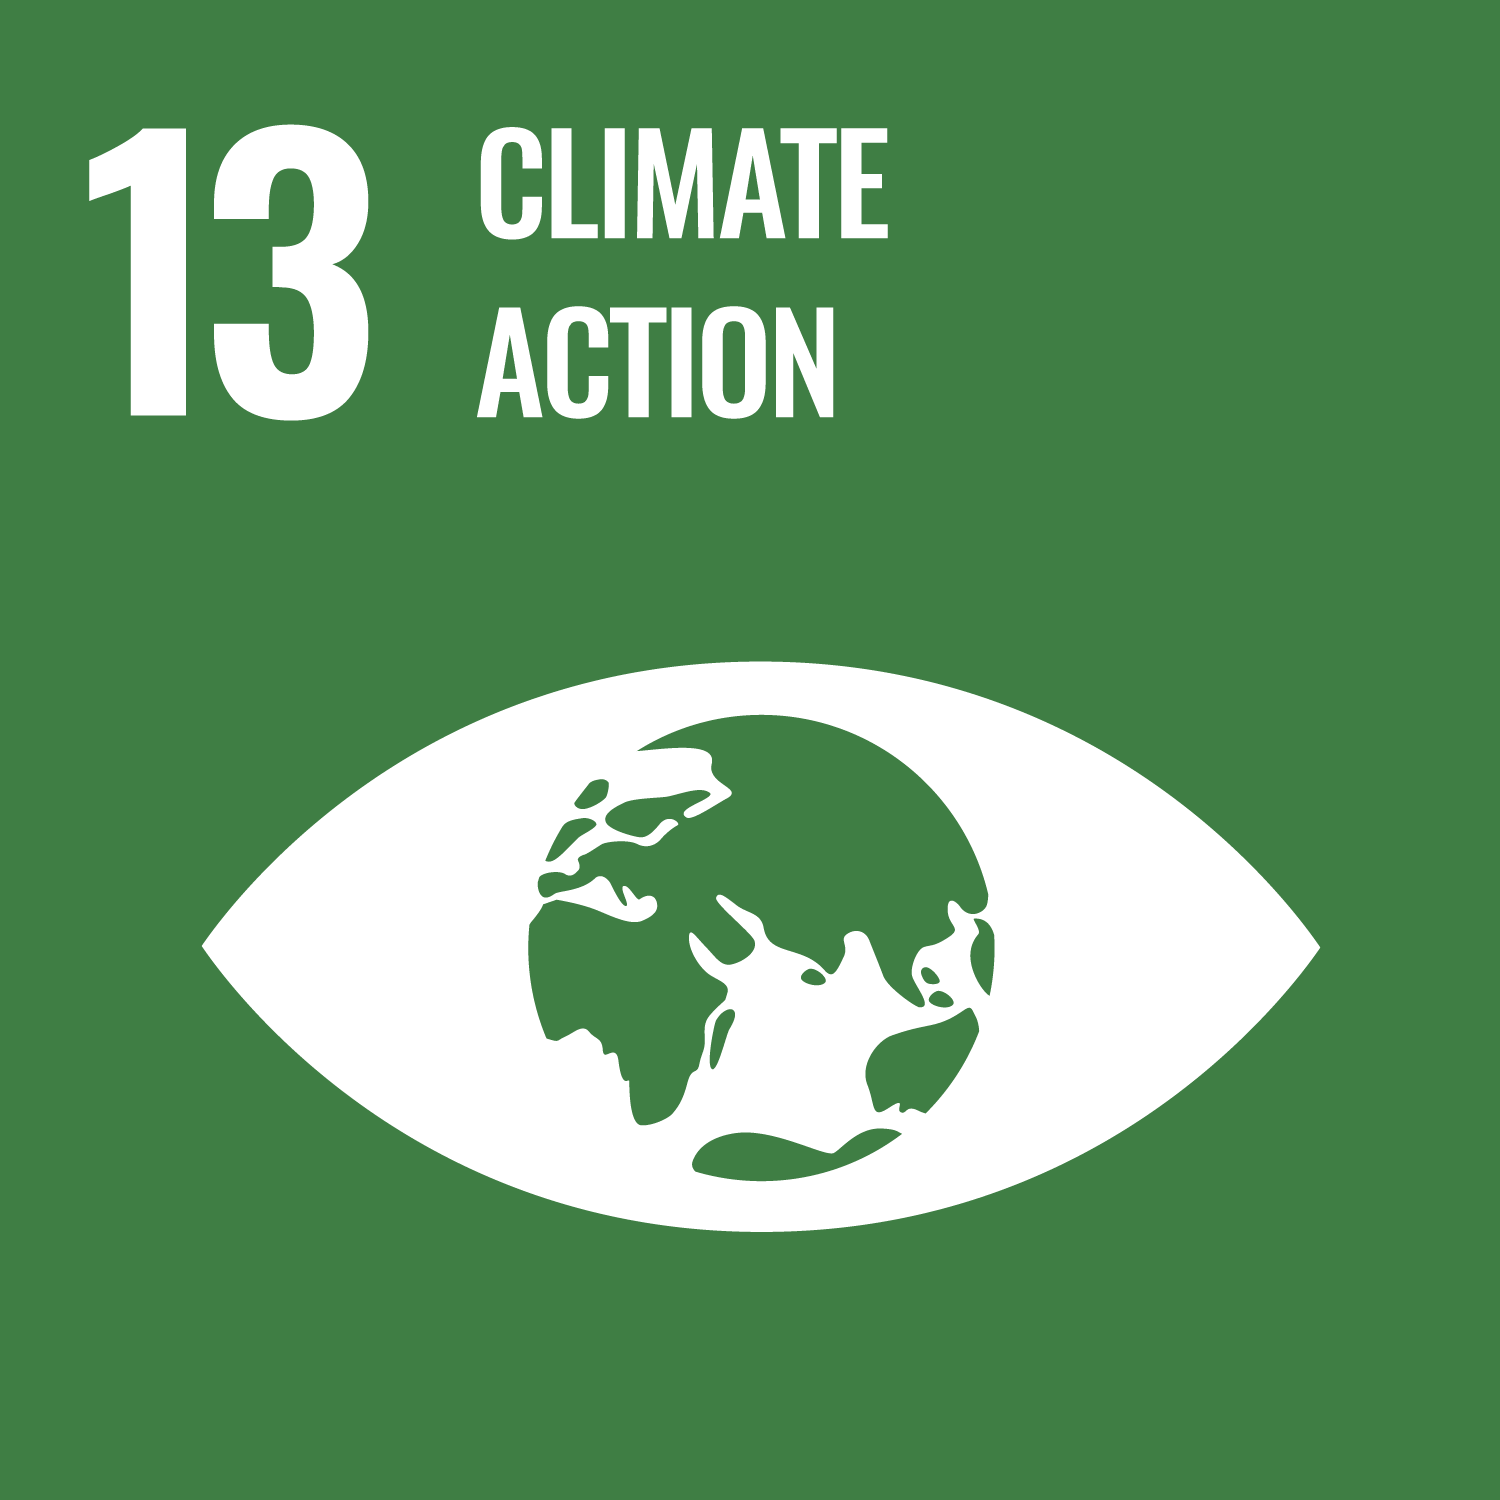 Goal number 13: Climate action